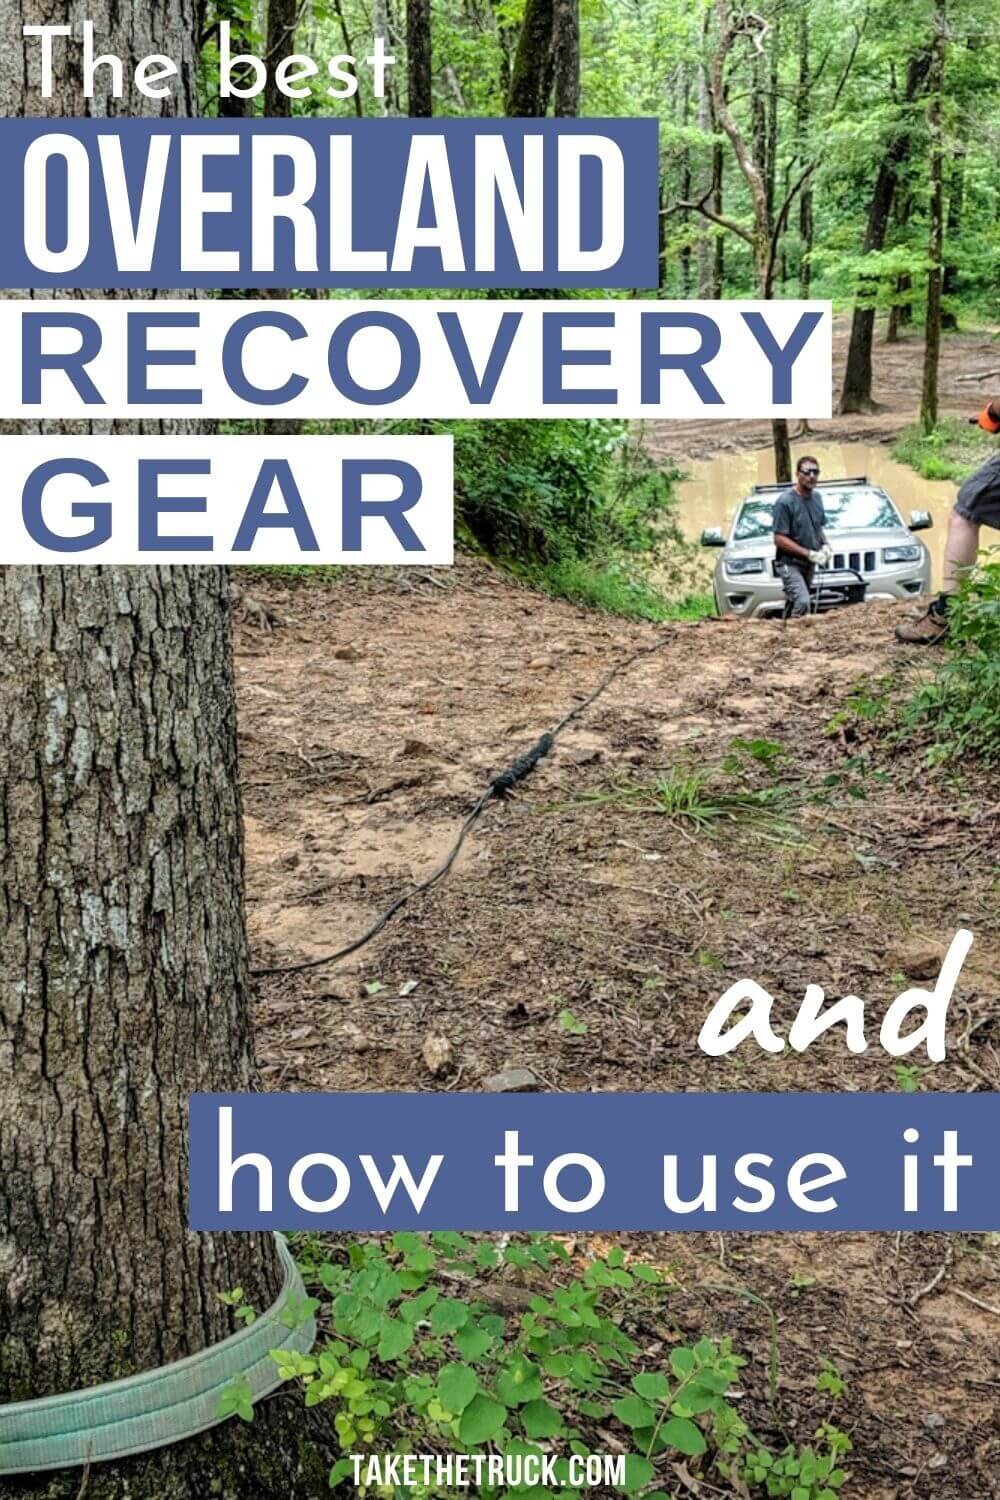 The best off road recovery gear, vehicle recovery equipment, and overland recovery kit for your overlanding rig. Be prepared in your off road recovery vehicle!